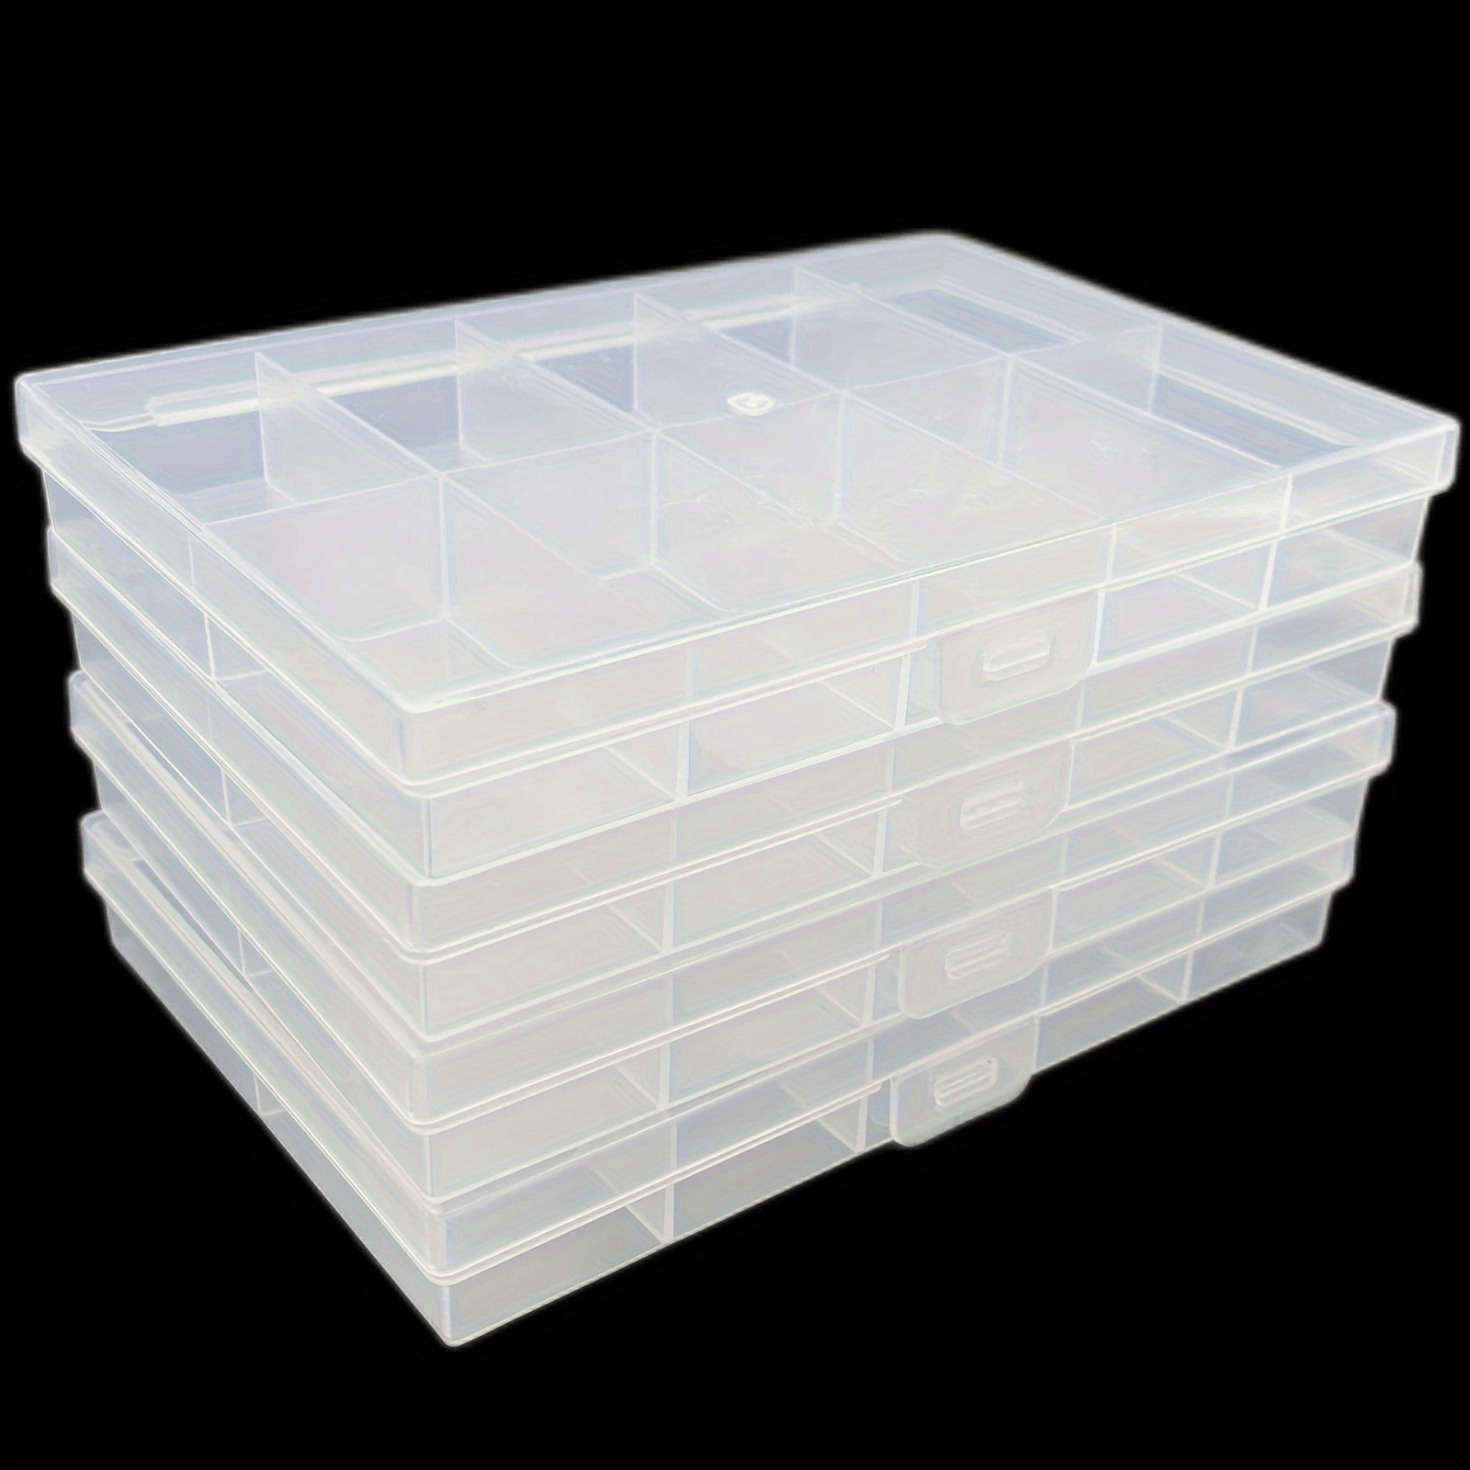  4PCS Clear White Plastic Organizer Box with Dividers 24 Grid  Storage Containers Jewelry Storage Box with Dividers for Beads Earrings  Necklaces Rings Metal Parts Accessories Screws Button Storage : Arts, Crafts